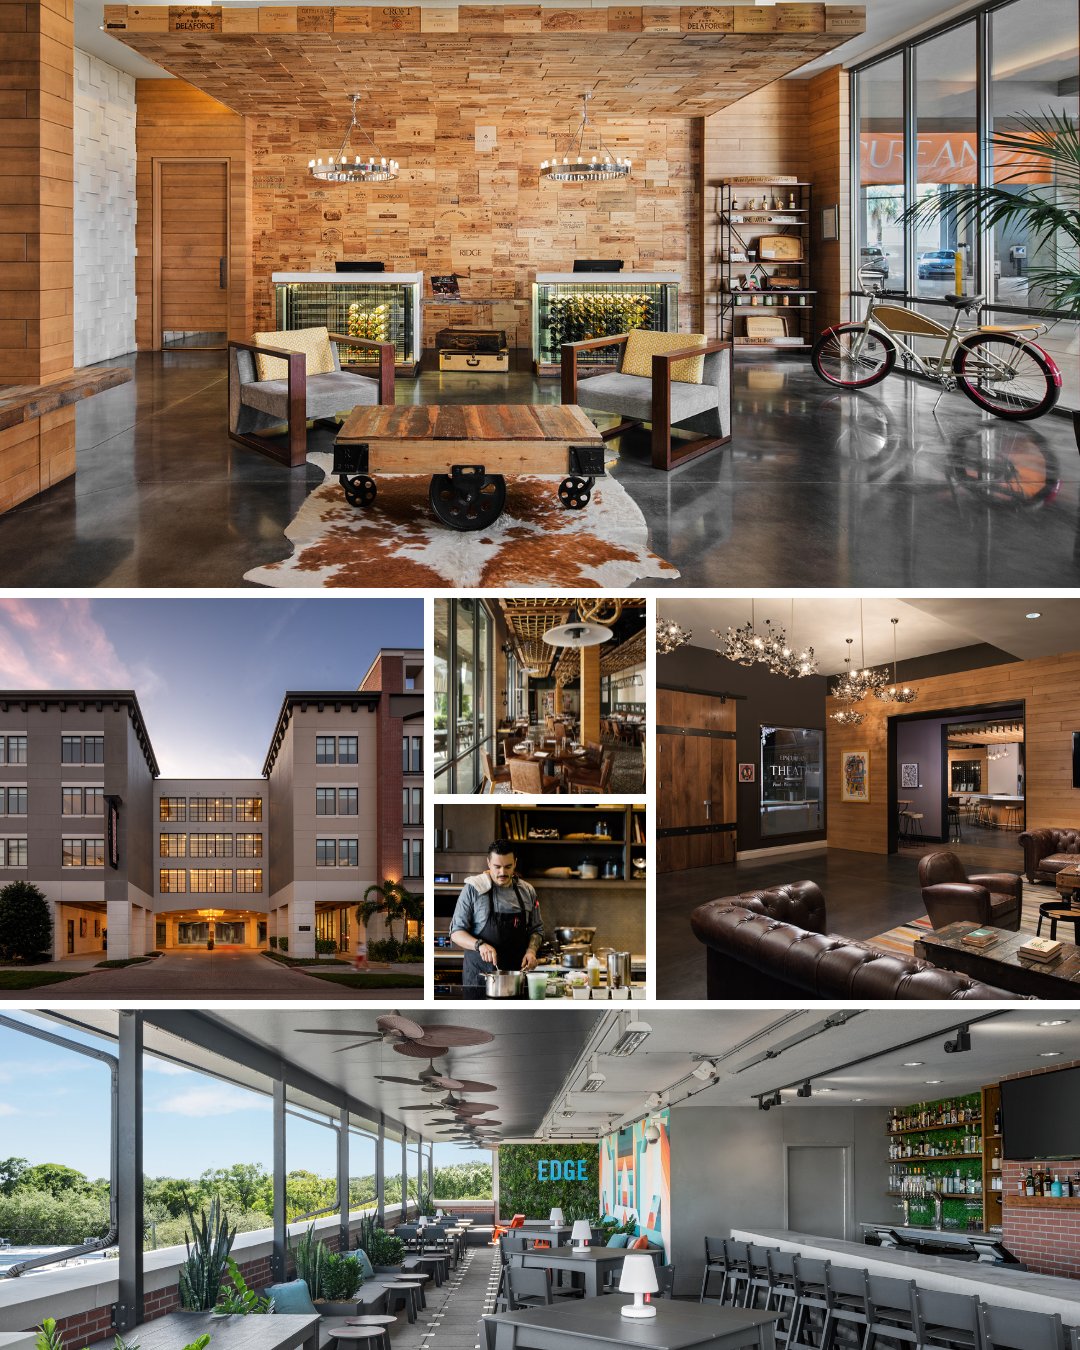 Epicurean Hotel in Florida interior lobby, bars, lounges and outdoor restaurant